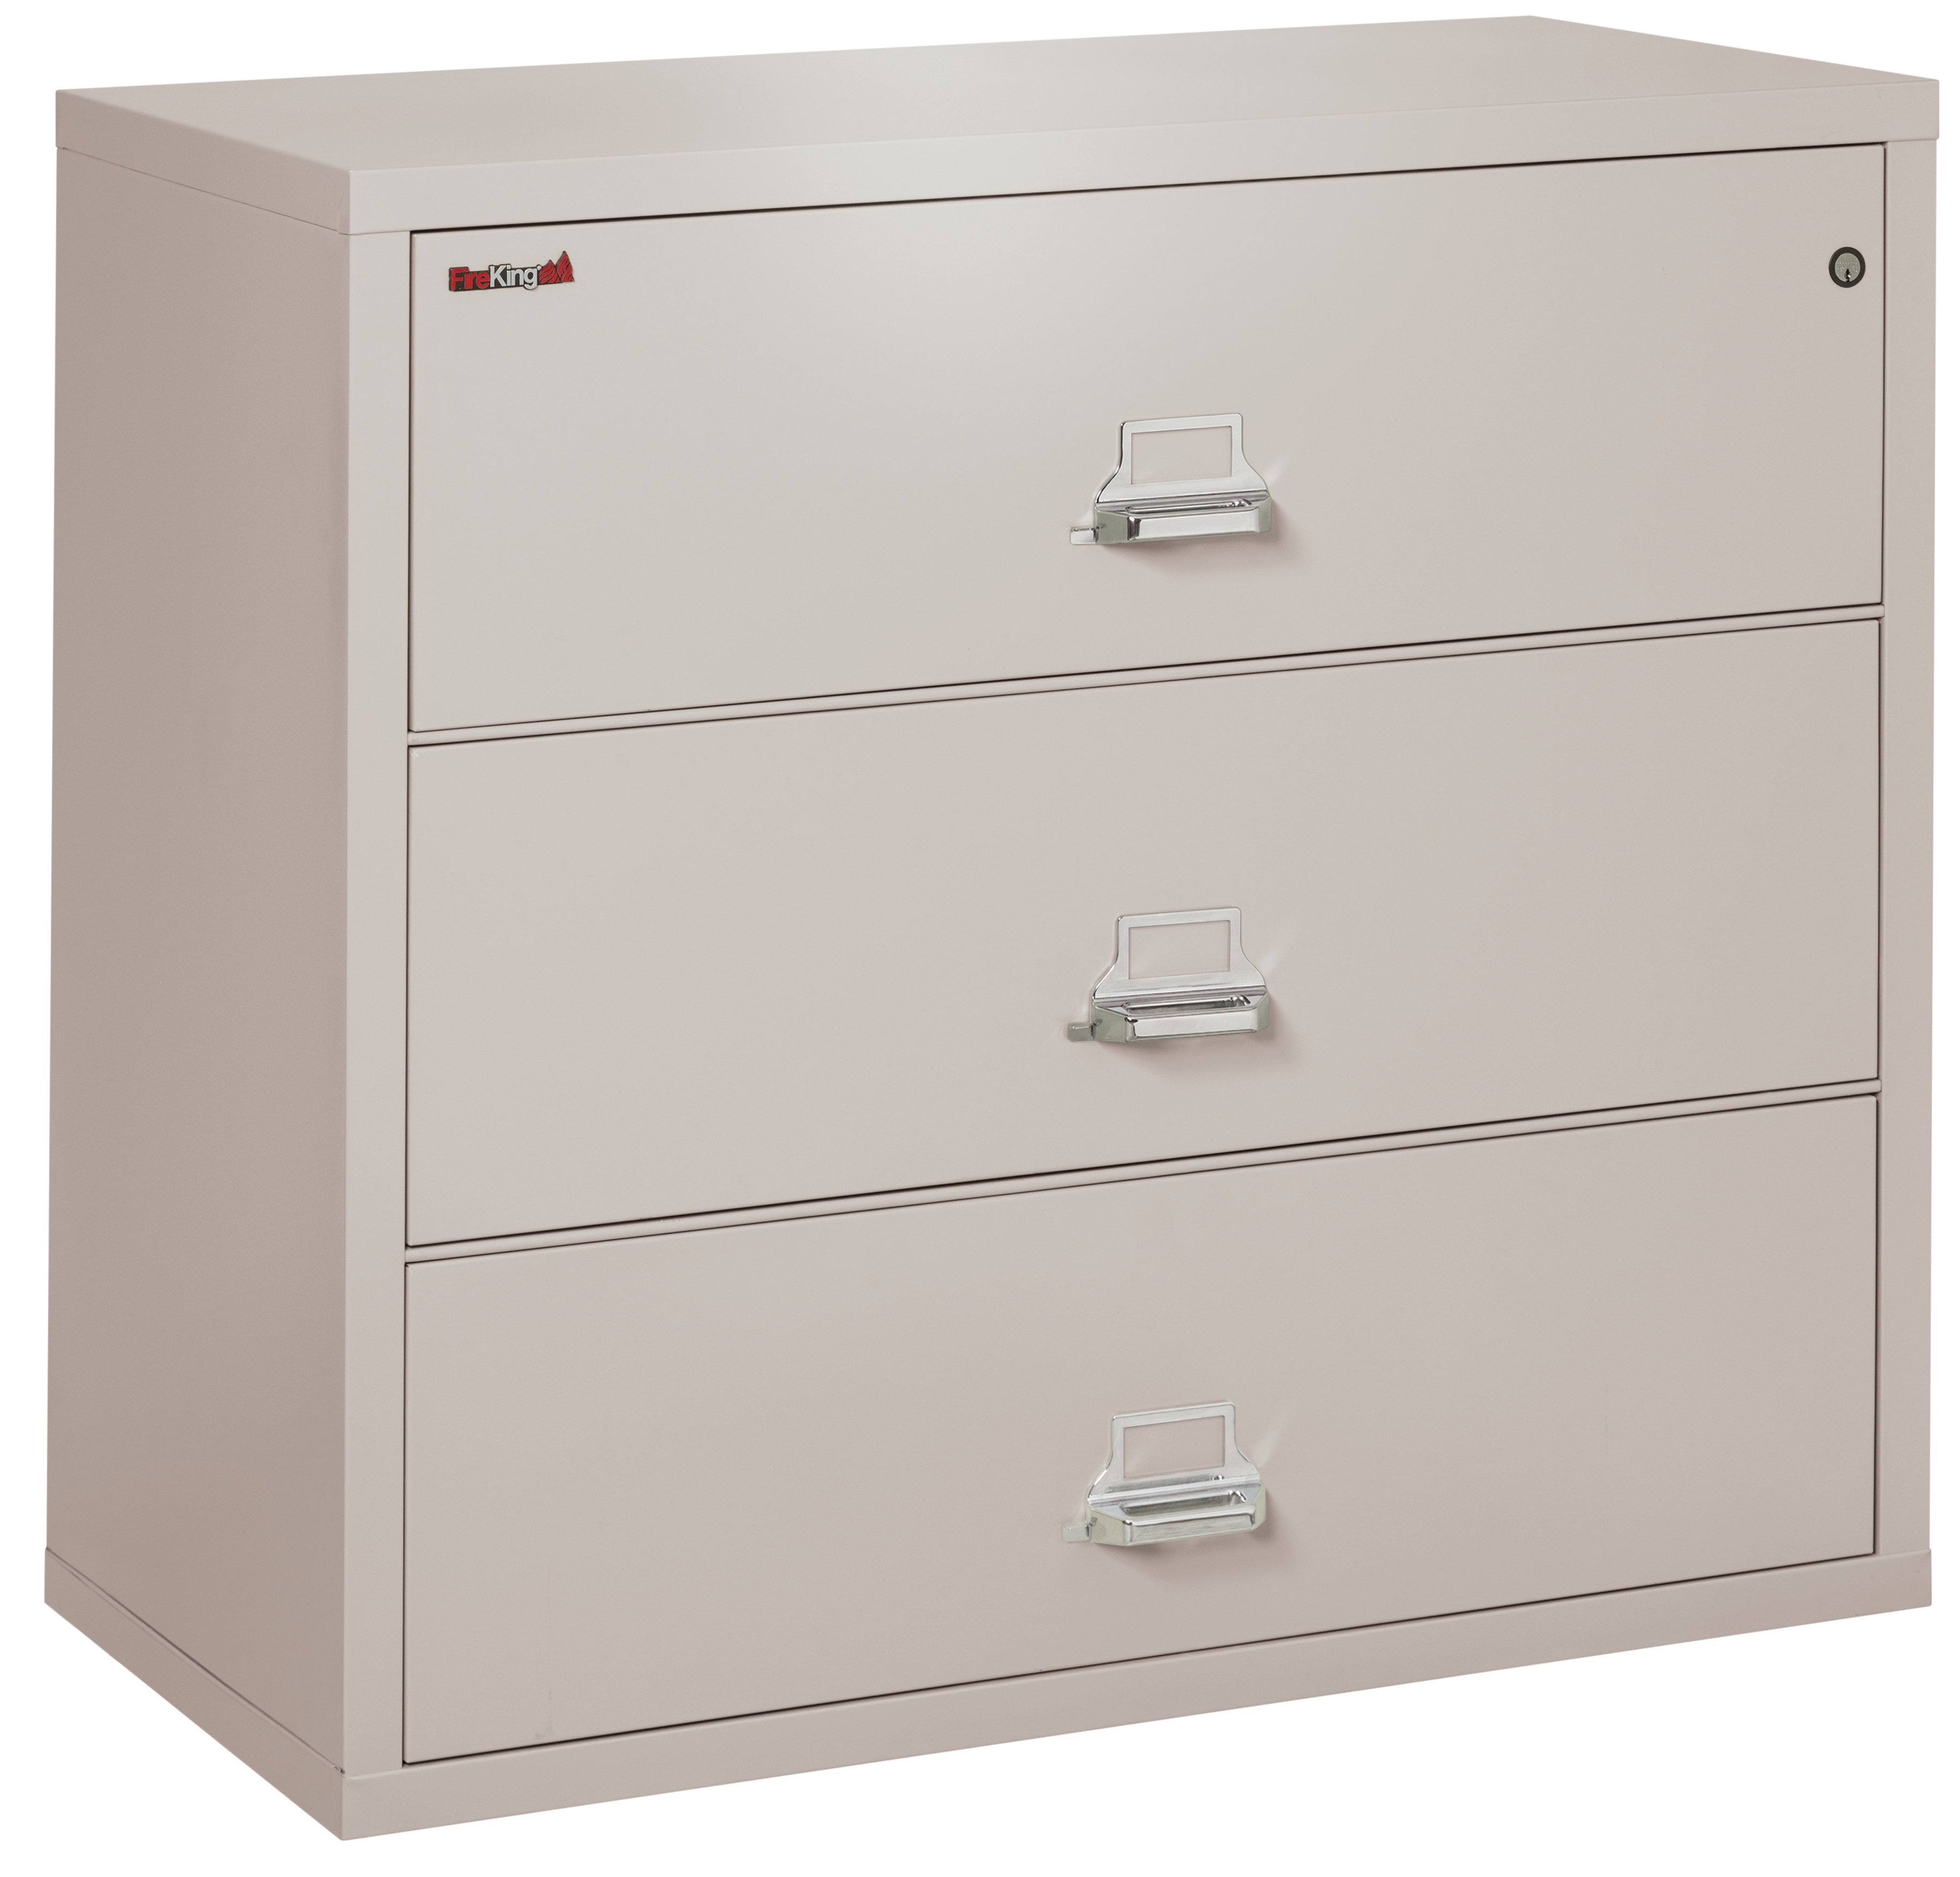 Fireking 3 Drawer Lateral File Cabinet Wayfair pertaining to dimensions 3659 X 3504